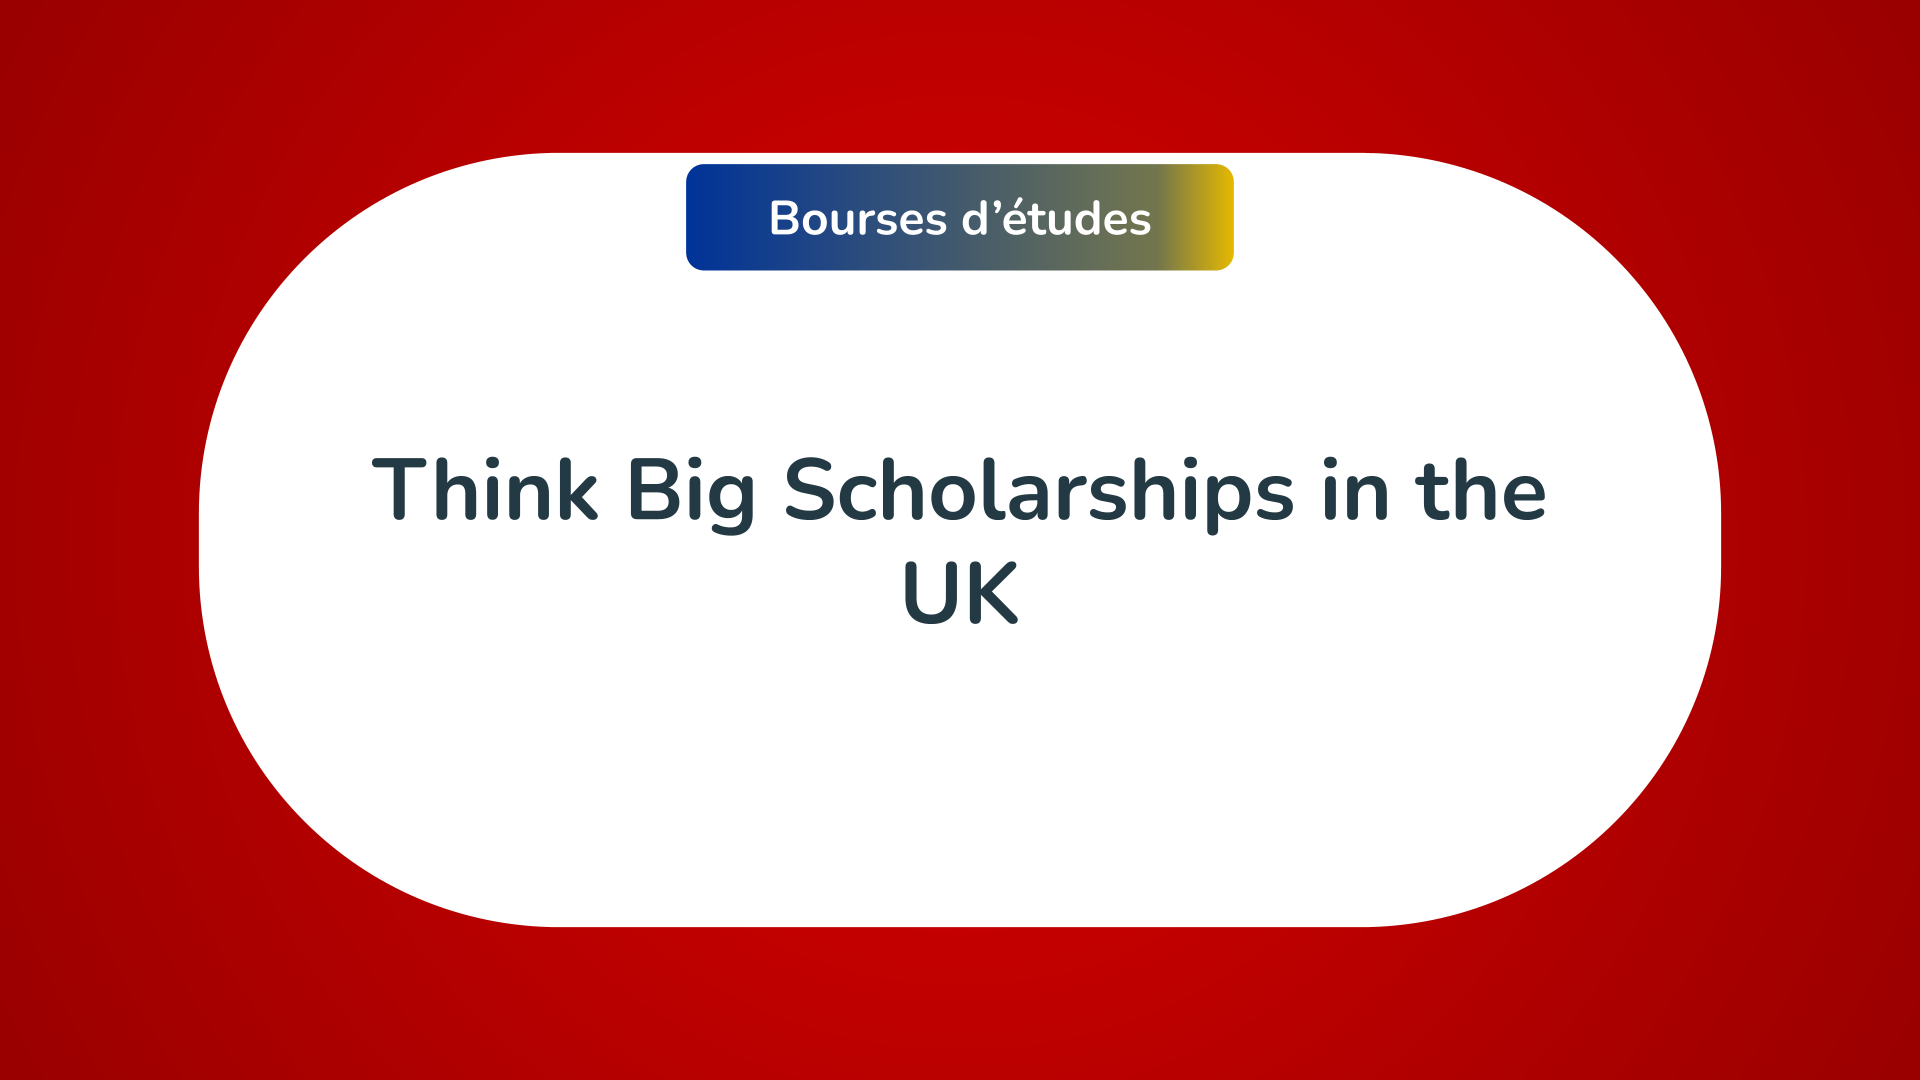 The 11 Think Big Scholarships in the UK in 2023